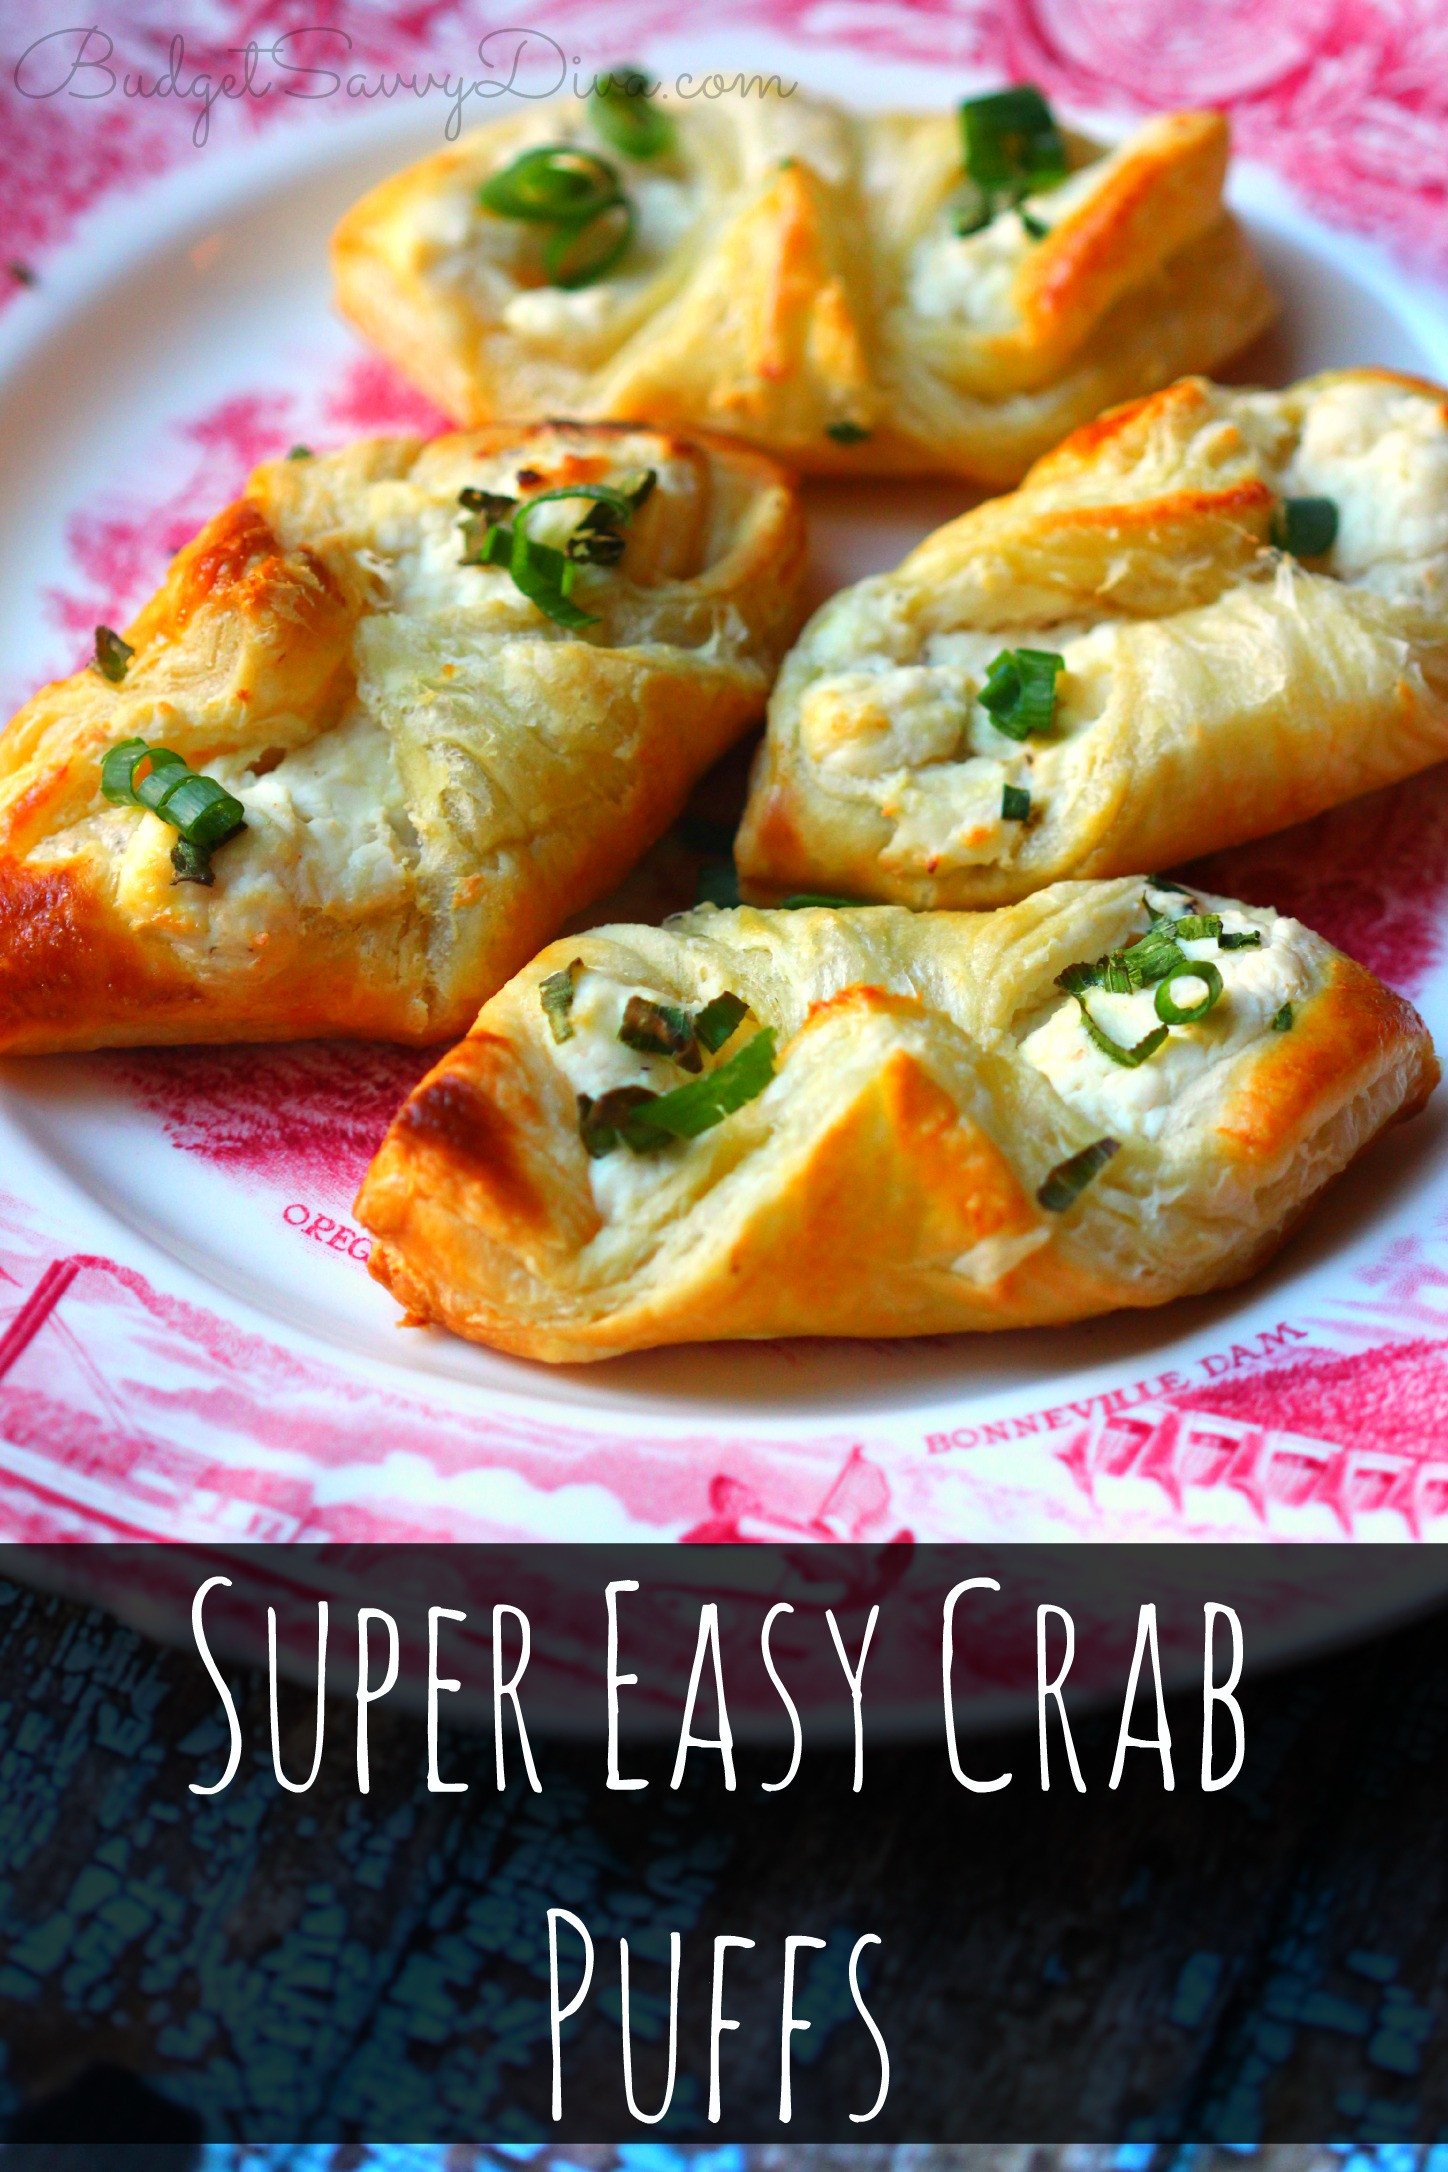 Puff Pastry Appetizers Recipes
 Super Easy Crab Puffs Recipe